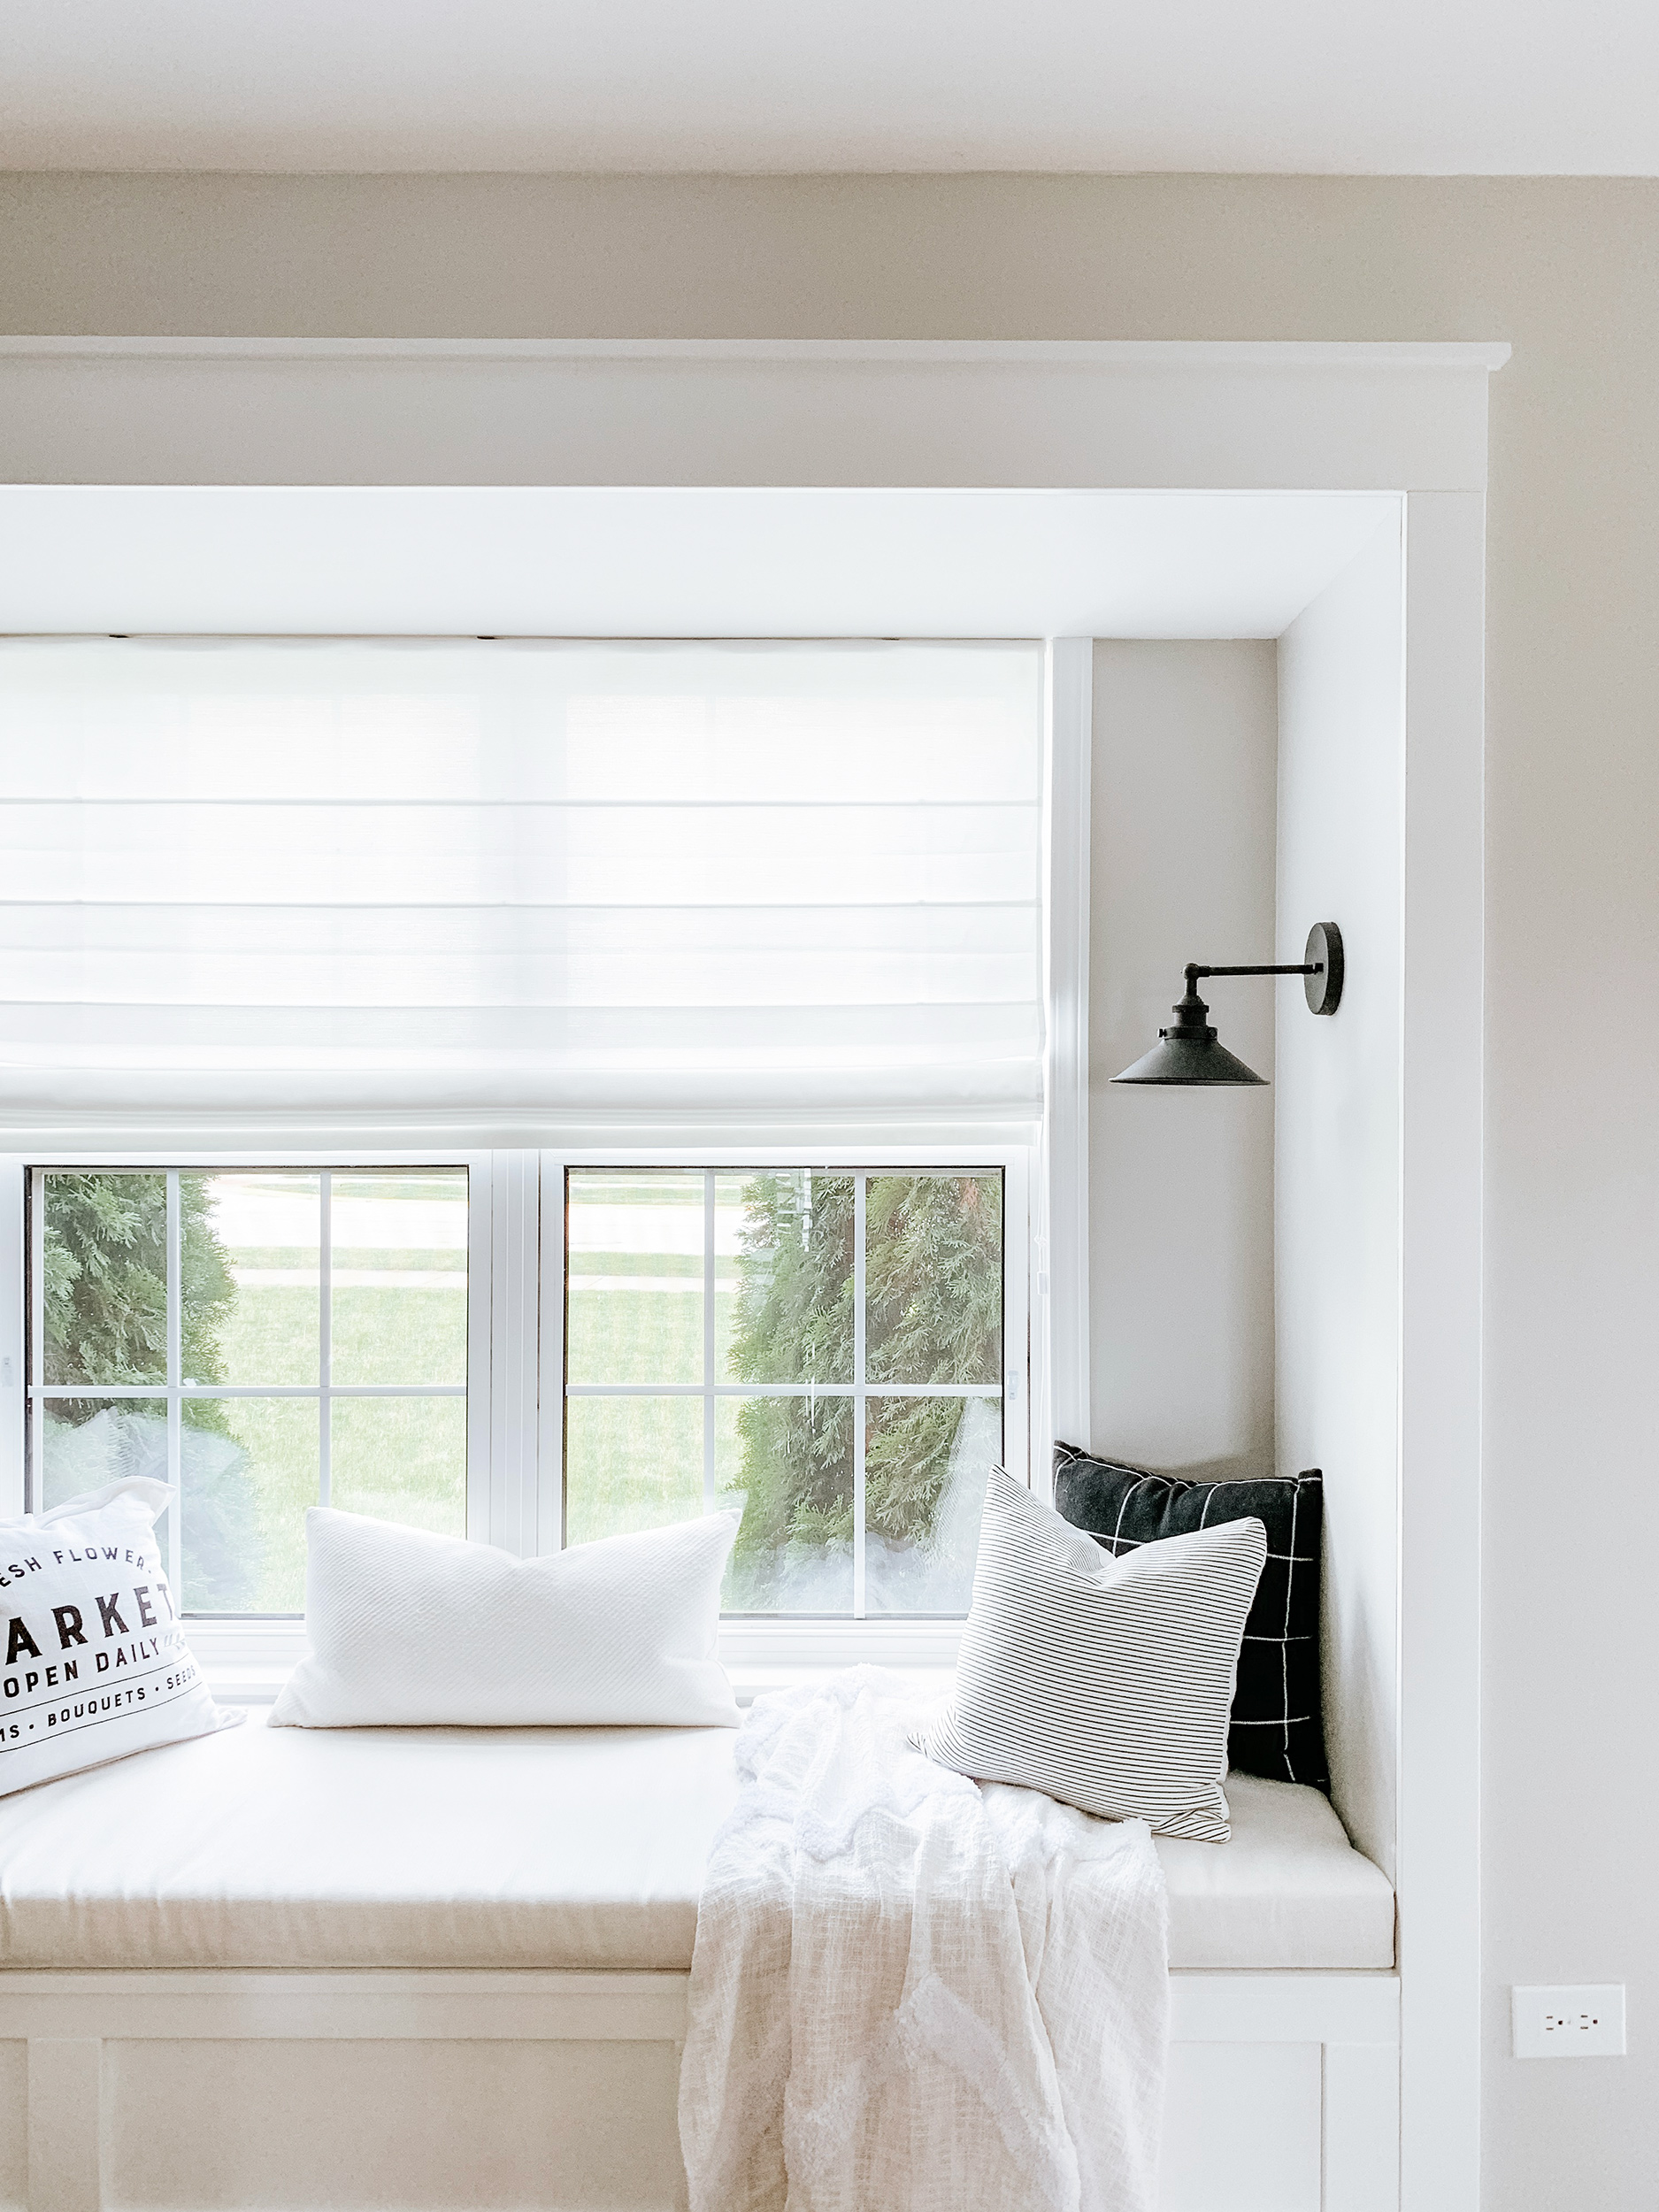 Select Blind Classic Roman Shade in Simply White close up